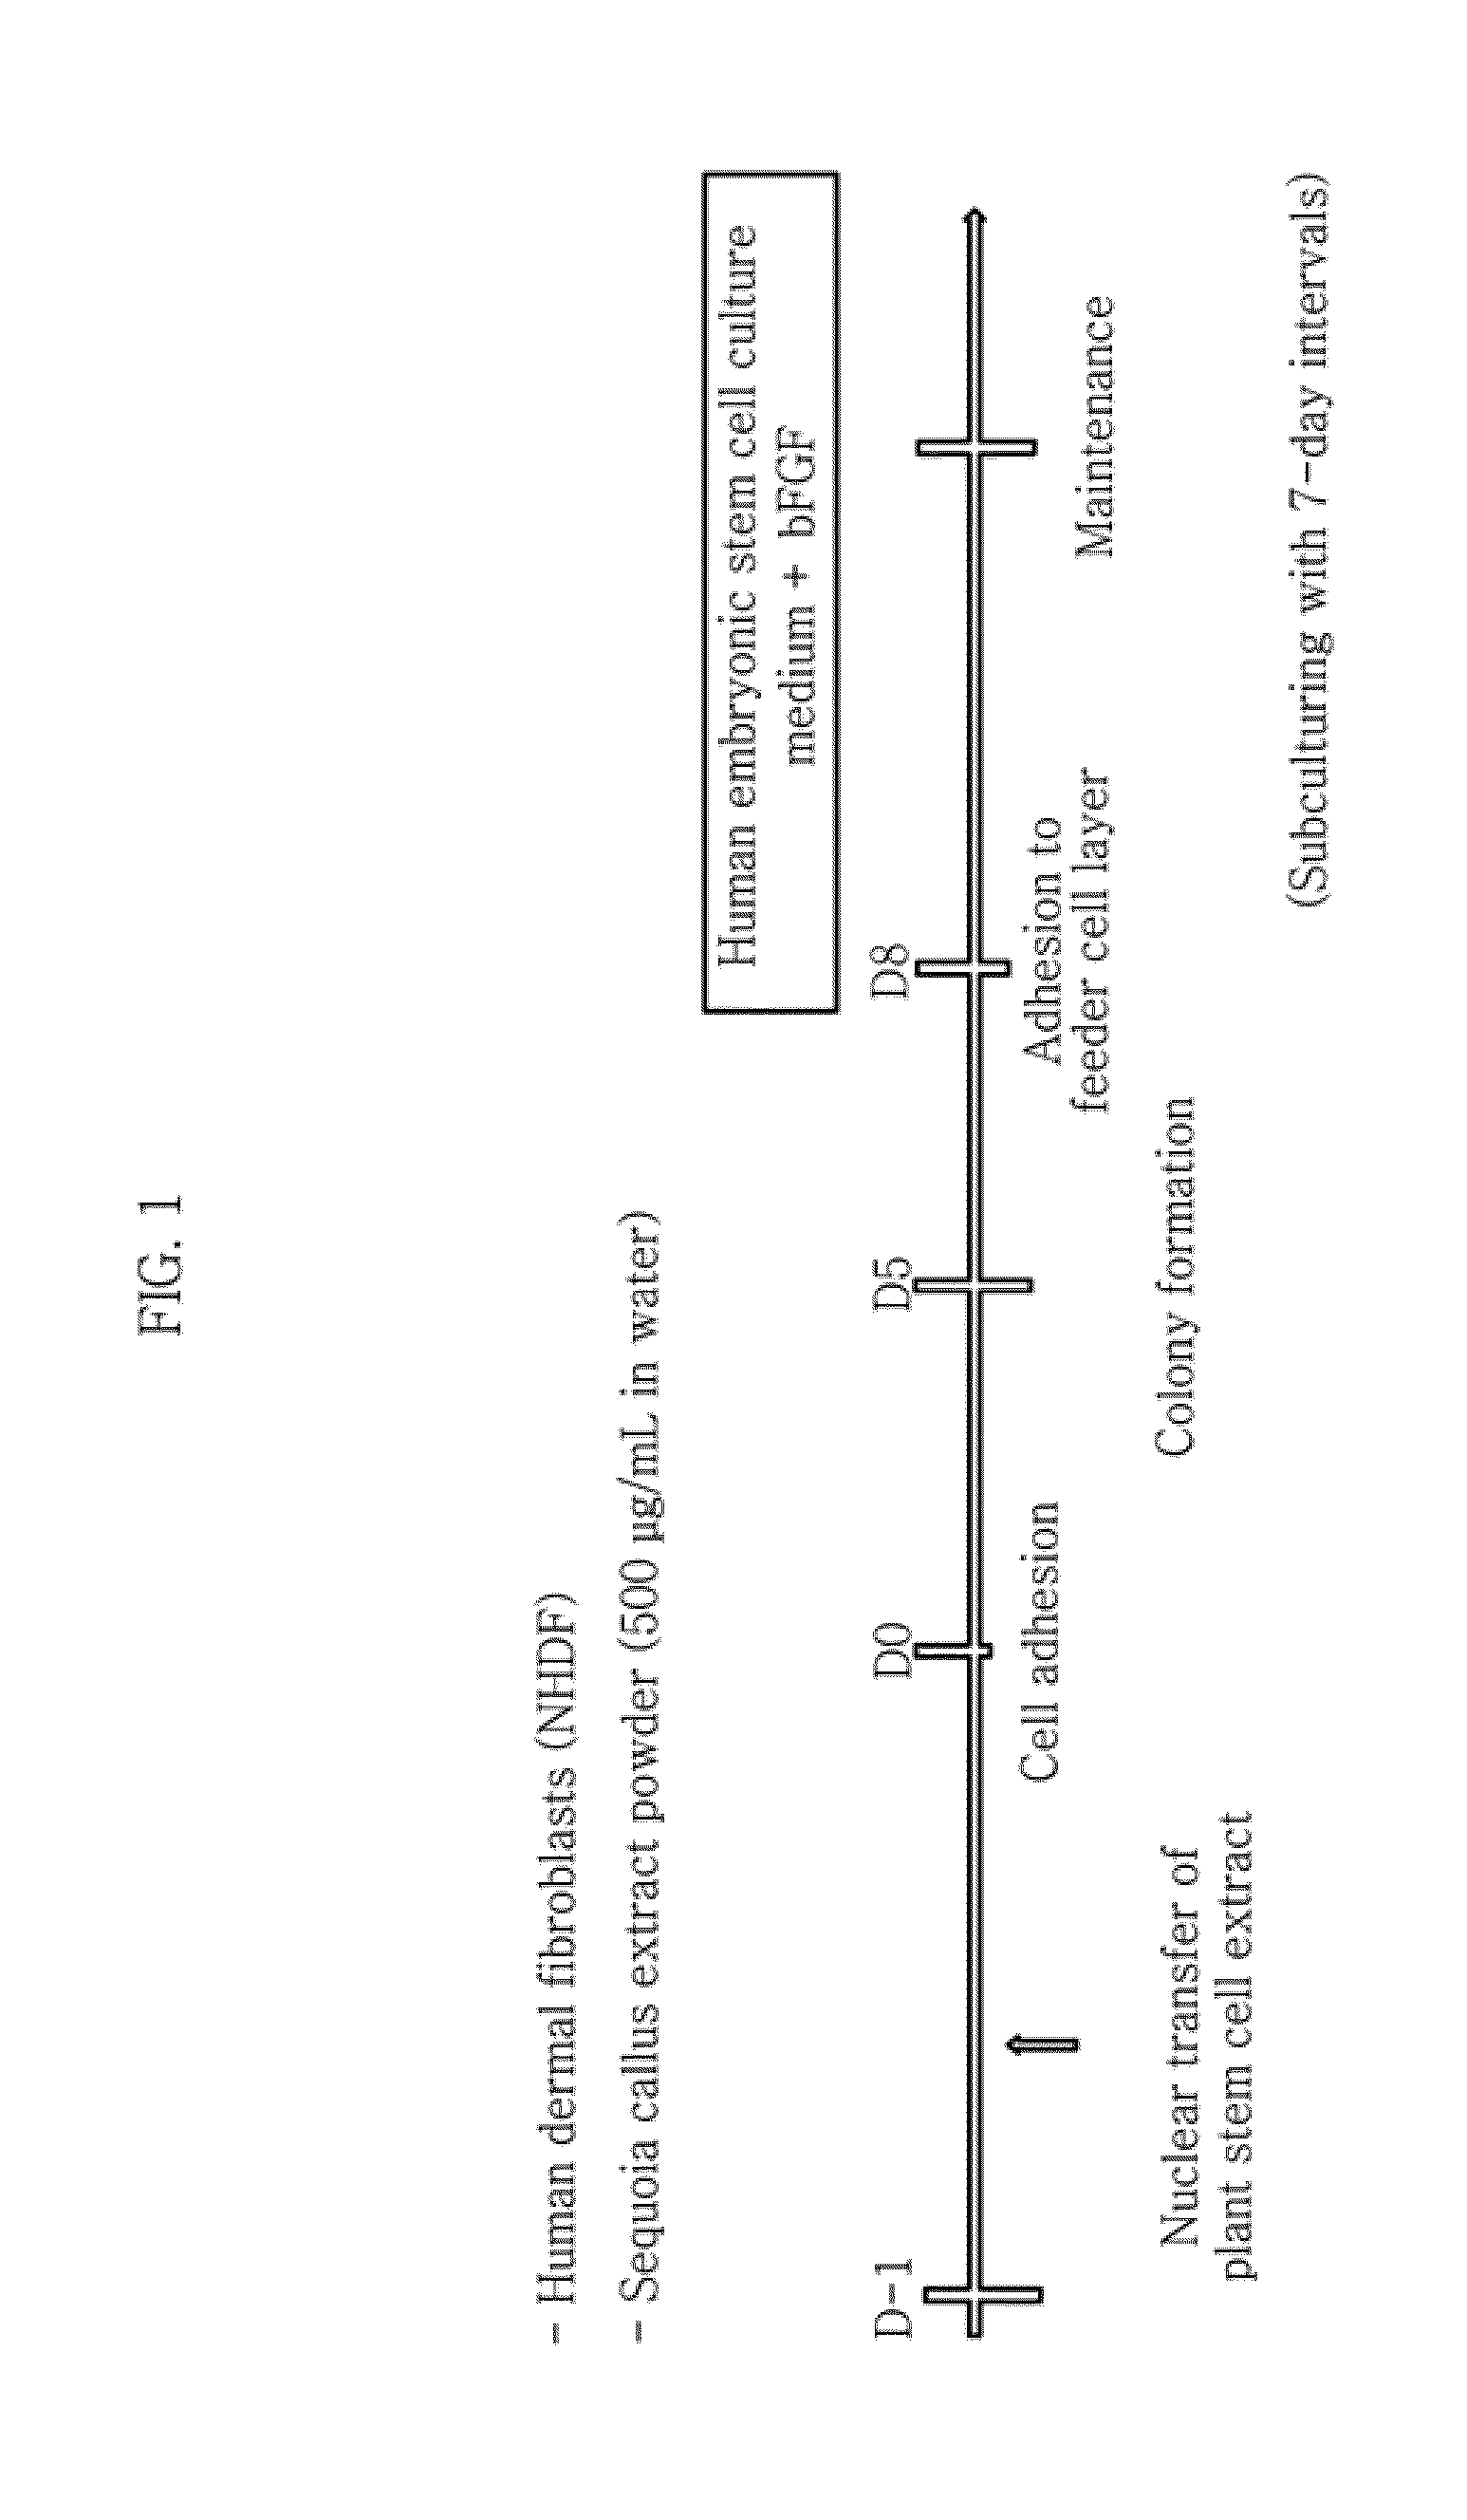 Method for inducing pluripotent stem cells and pluripotent stem cells prepared by said method